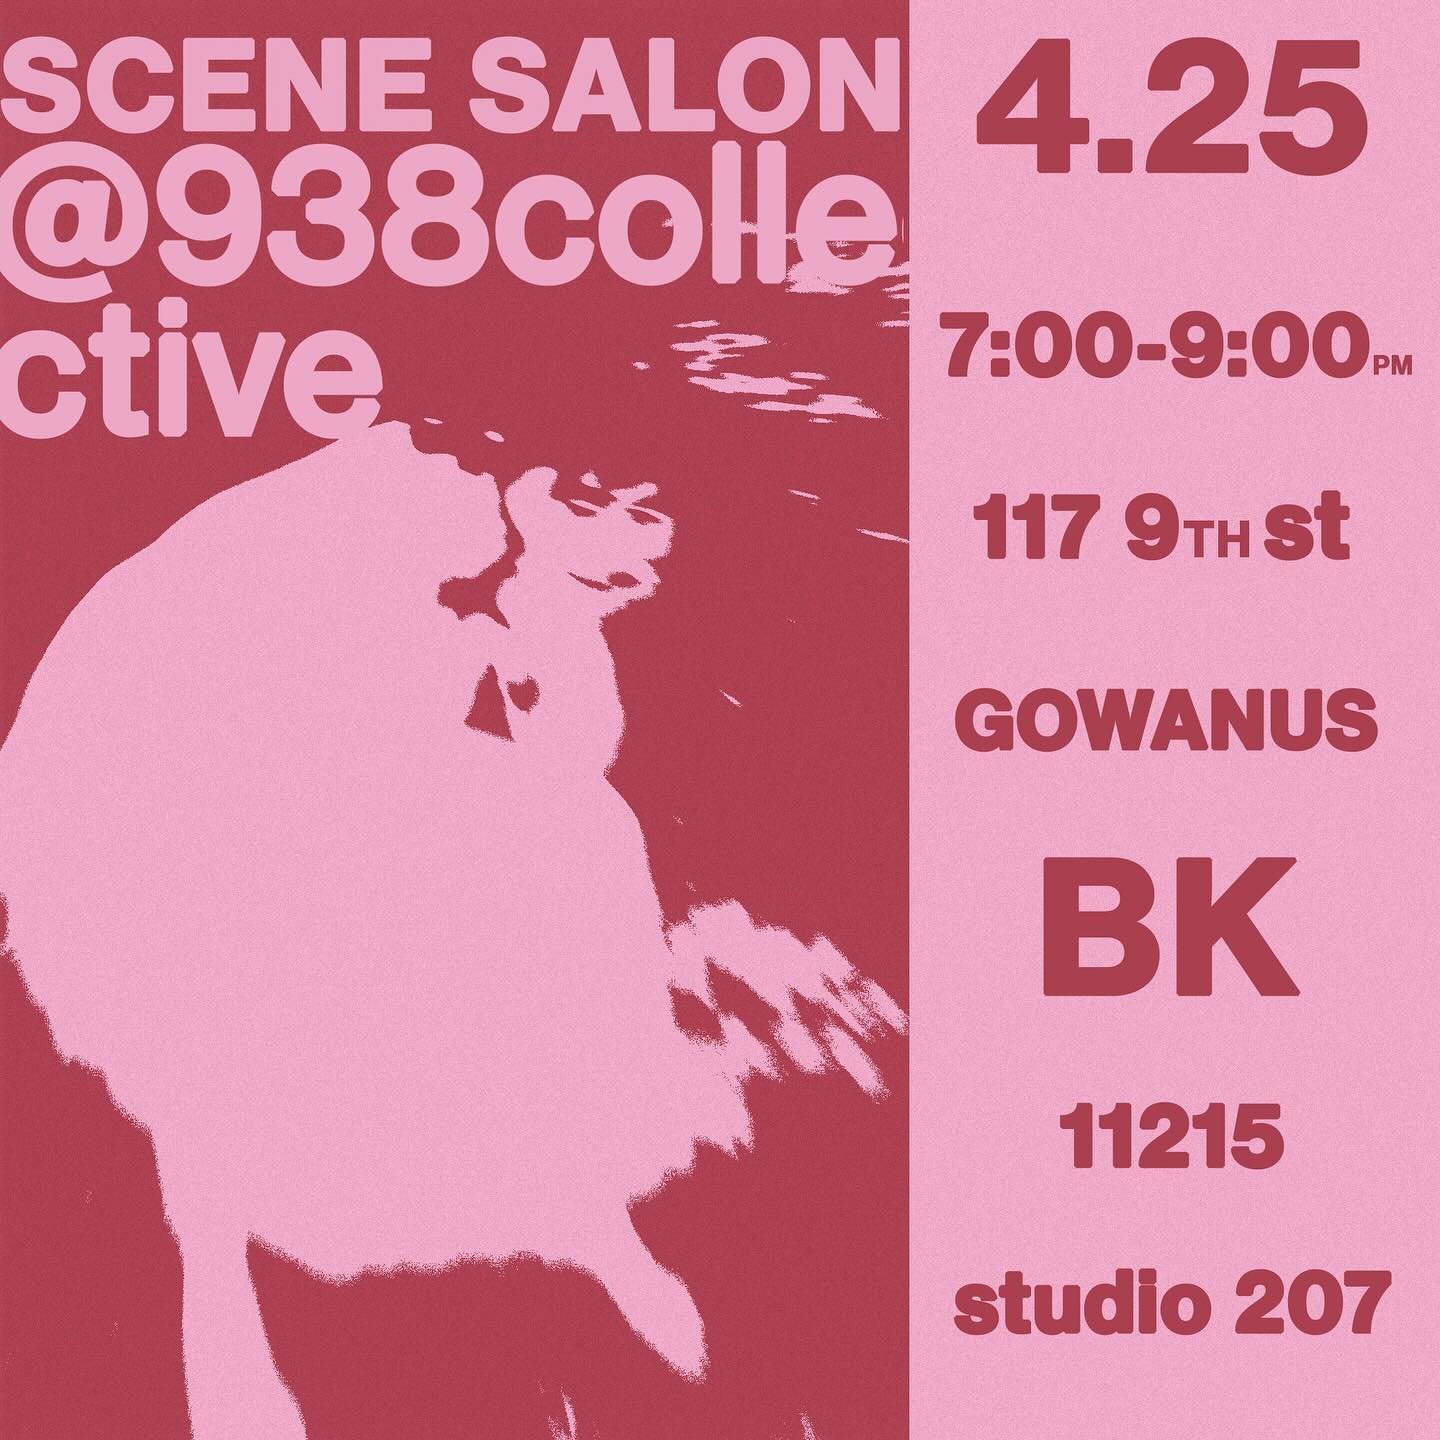 come thru to da stu on 4.25 to work on and perform some scenes. 

scene selections from 
The Goat, or Who is Sylvia by Edward Albee, I Am the Wind  by John Fosse, The Effect by Lucy Prebble, The Aliens by Annie Baker, Grace by Craig Wright, and HIM b